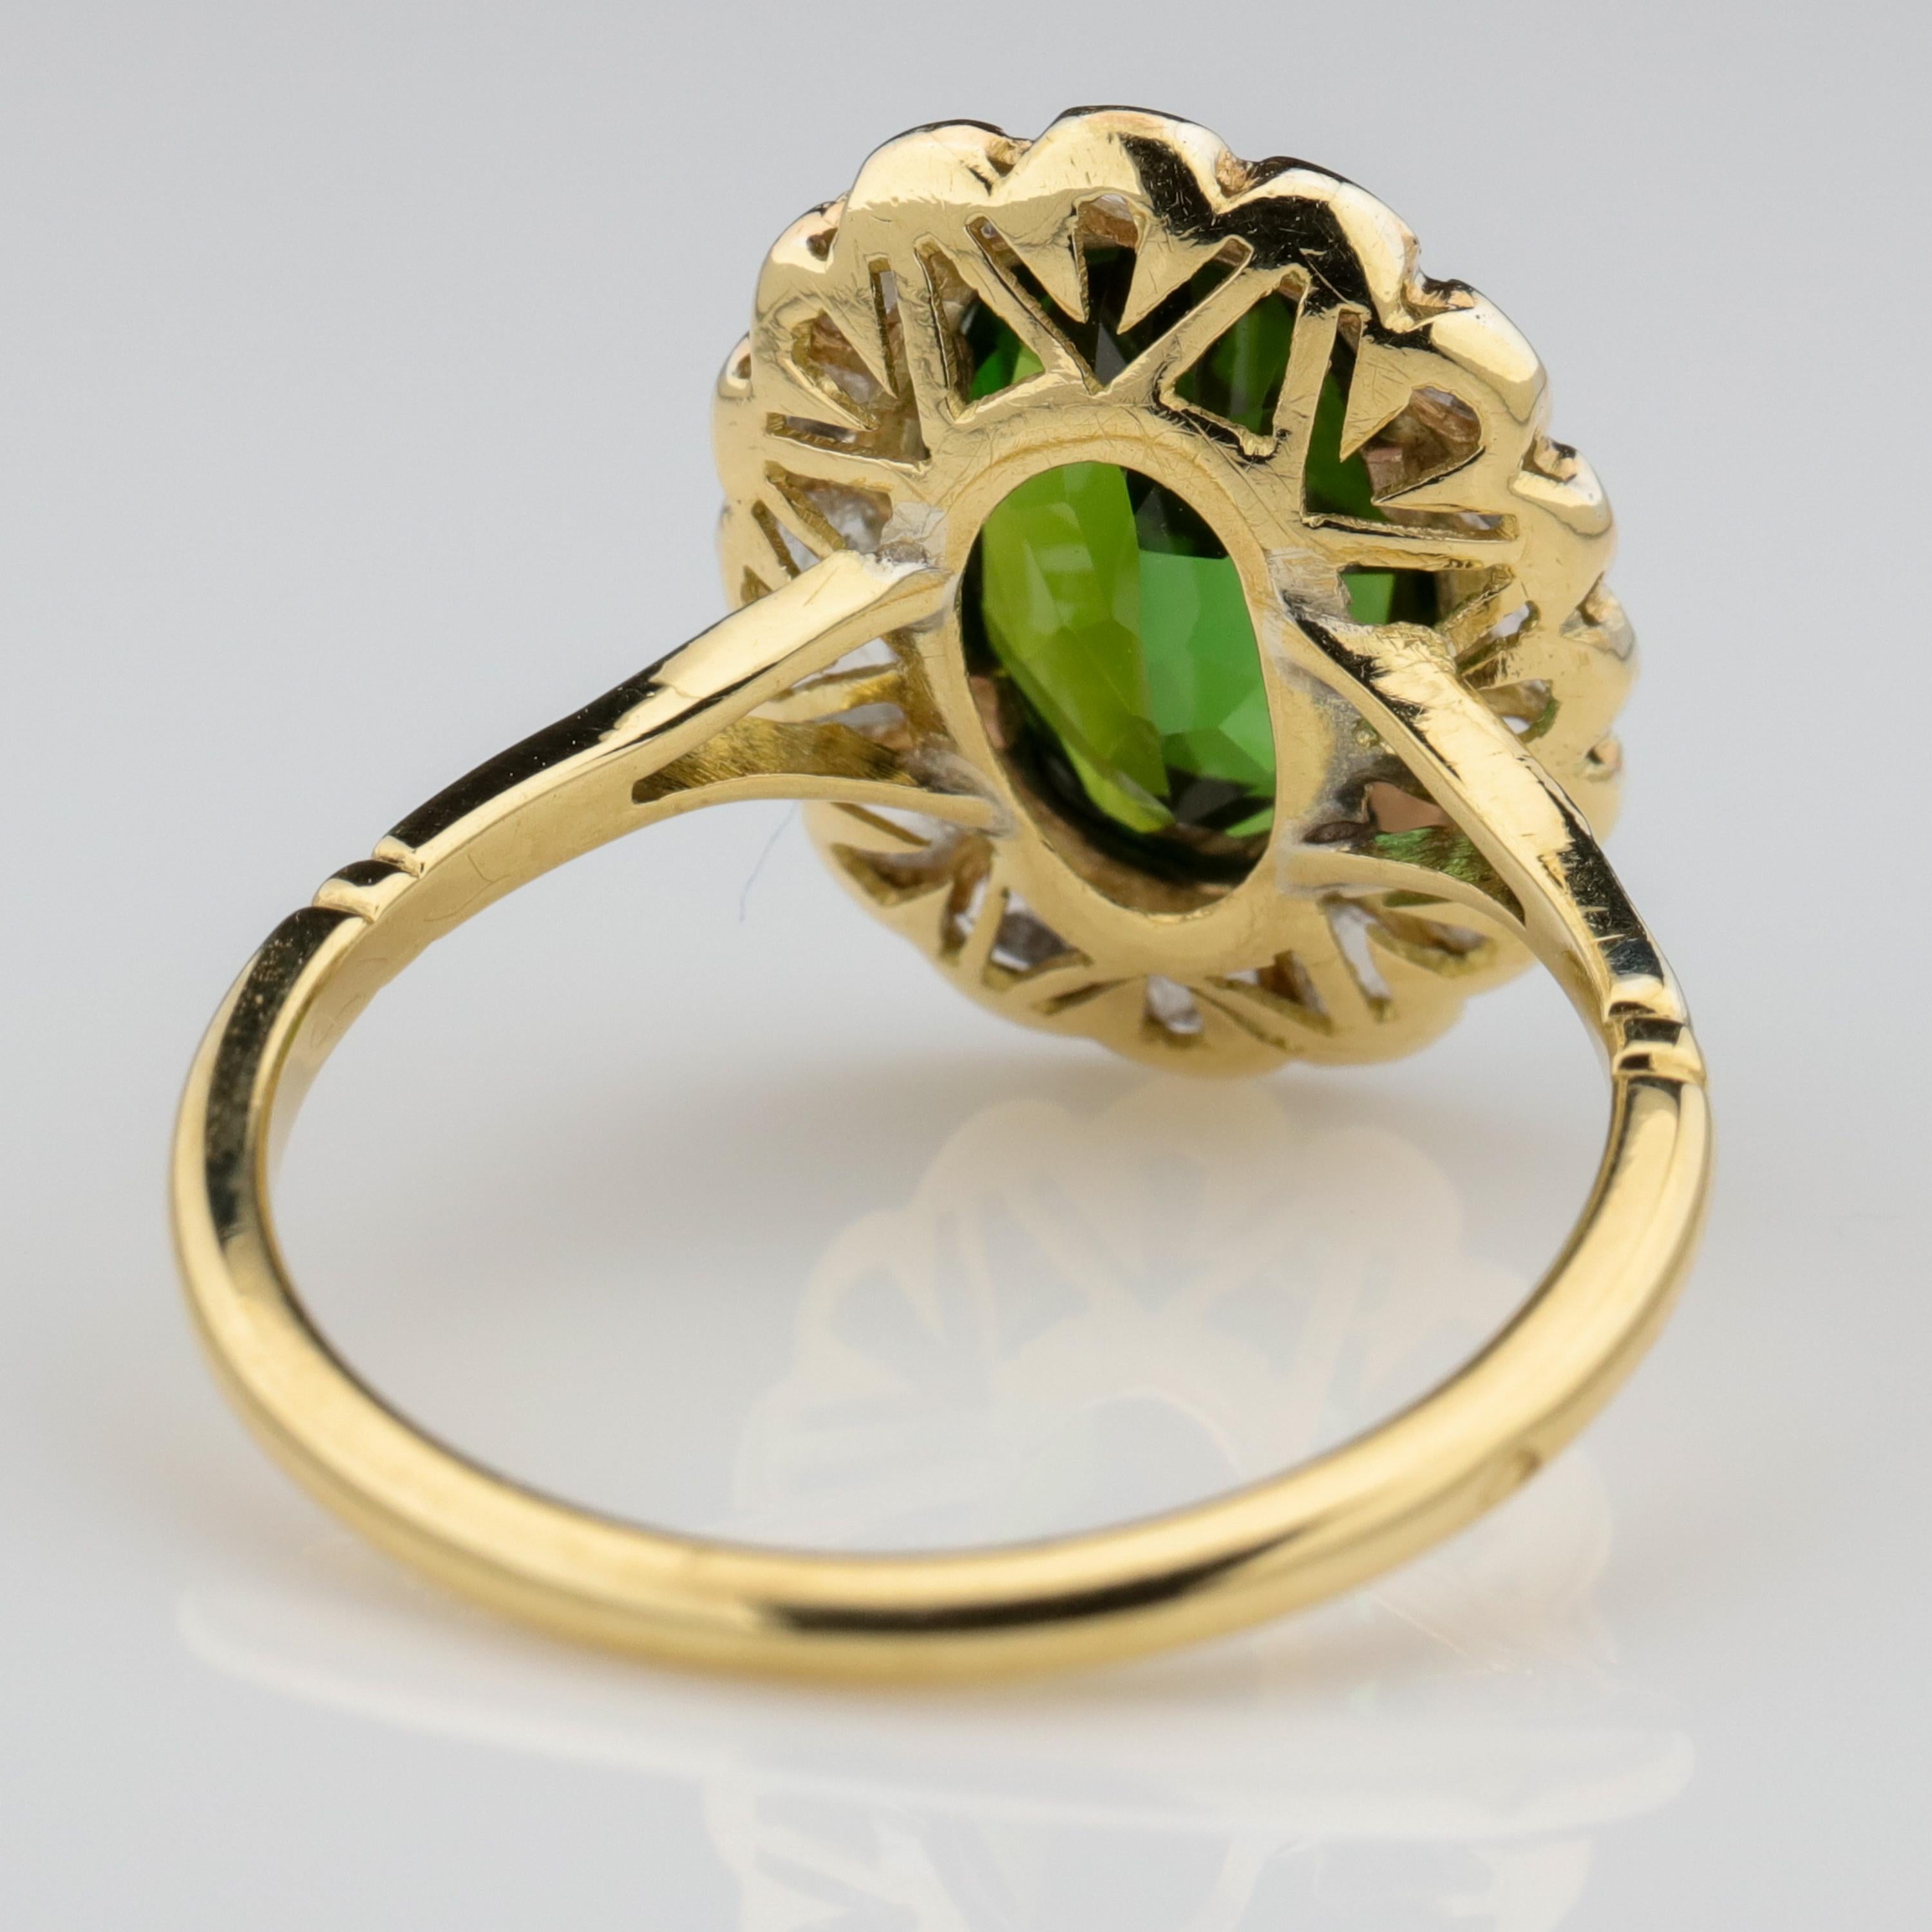 Oval Cut Tourmaline Ring with Early Diamonds French Antique